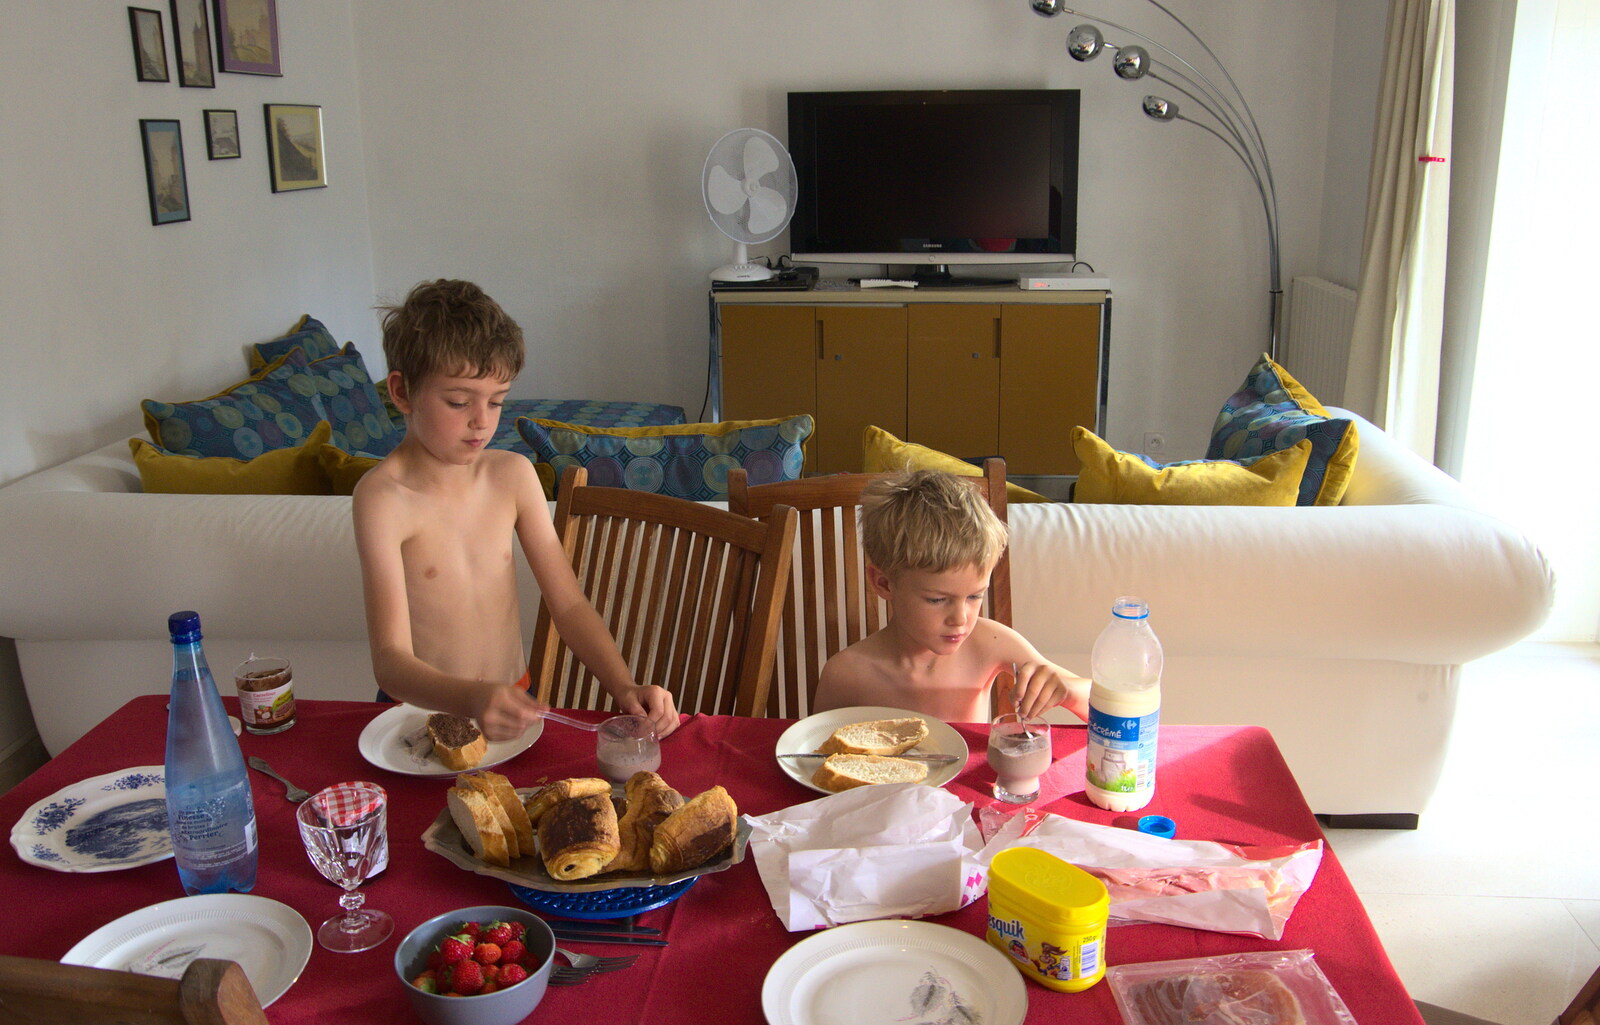 It's breakfast time in our rented house from A Trip to Carcassonne, Aude, France - 8th August 2018